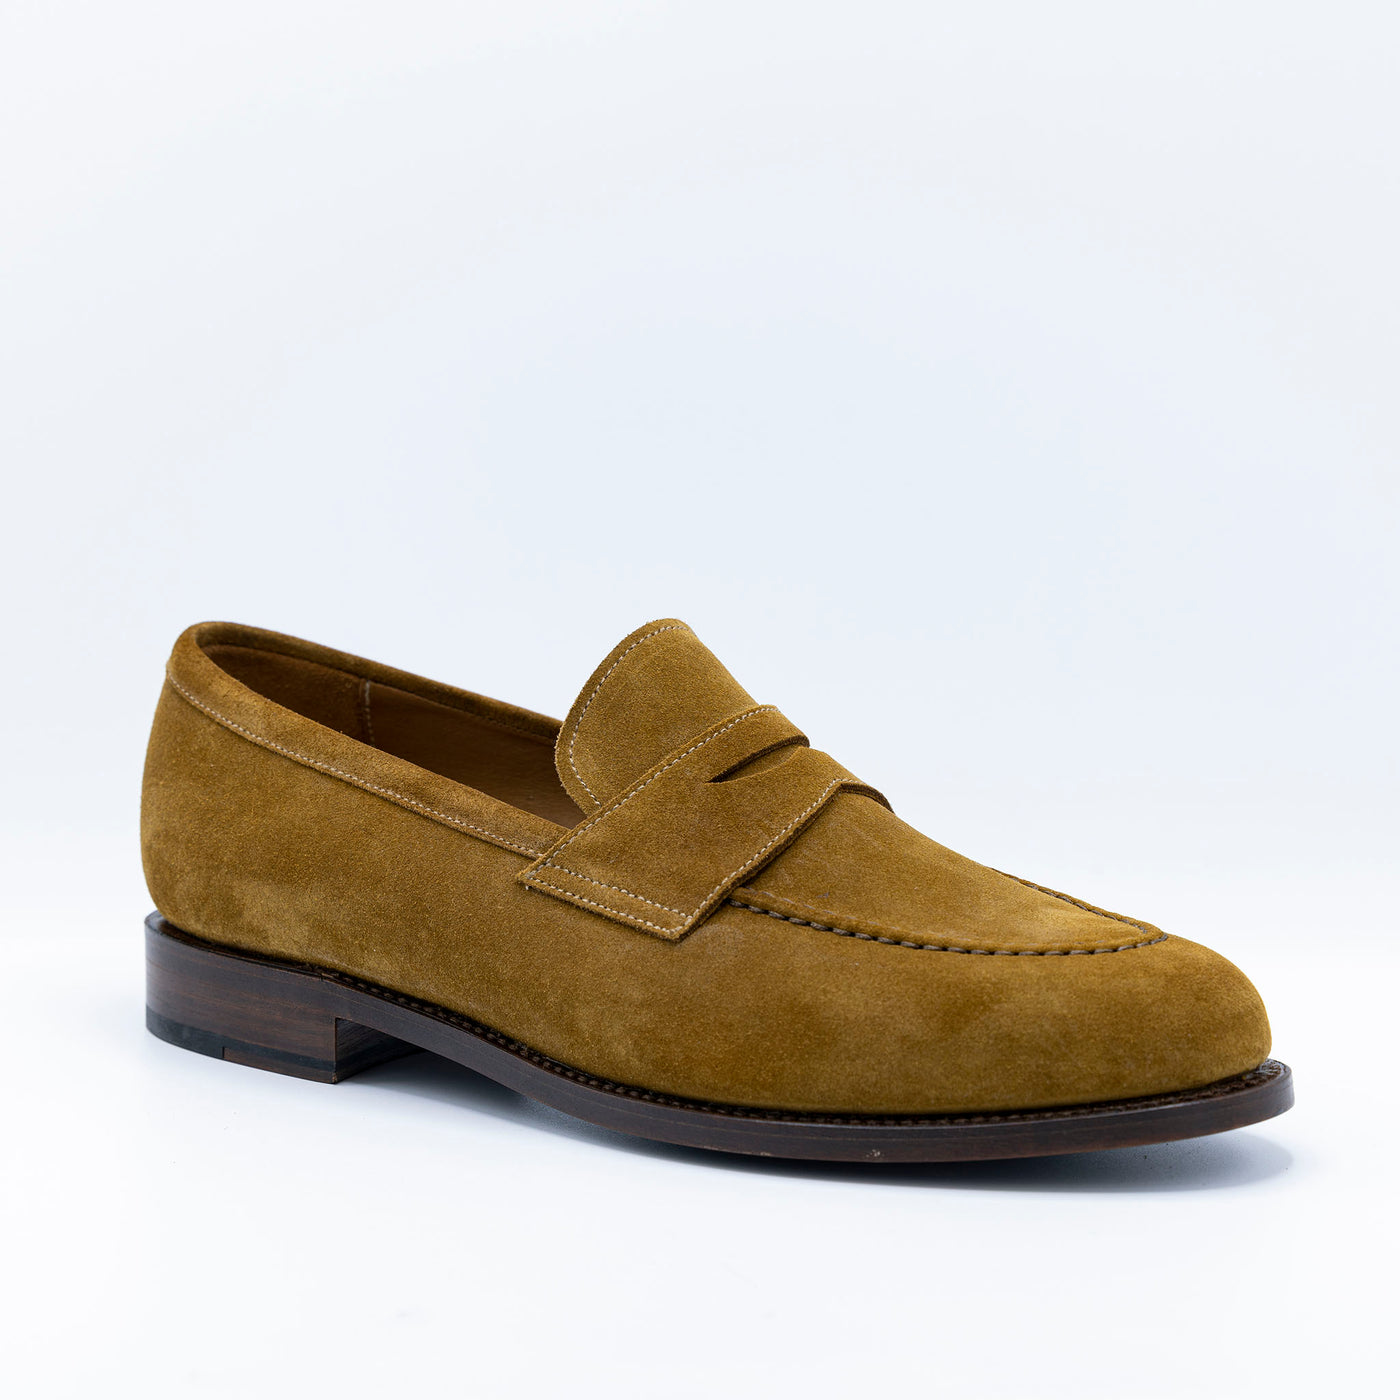 The Penny Loafer in Cognac Suede